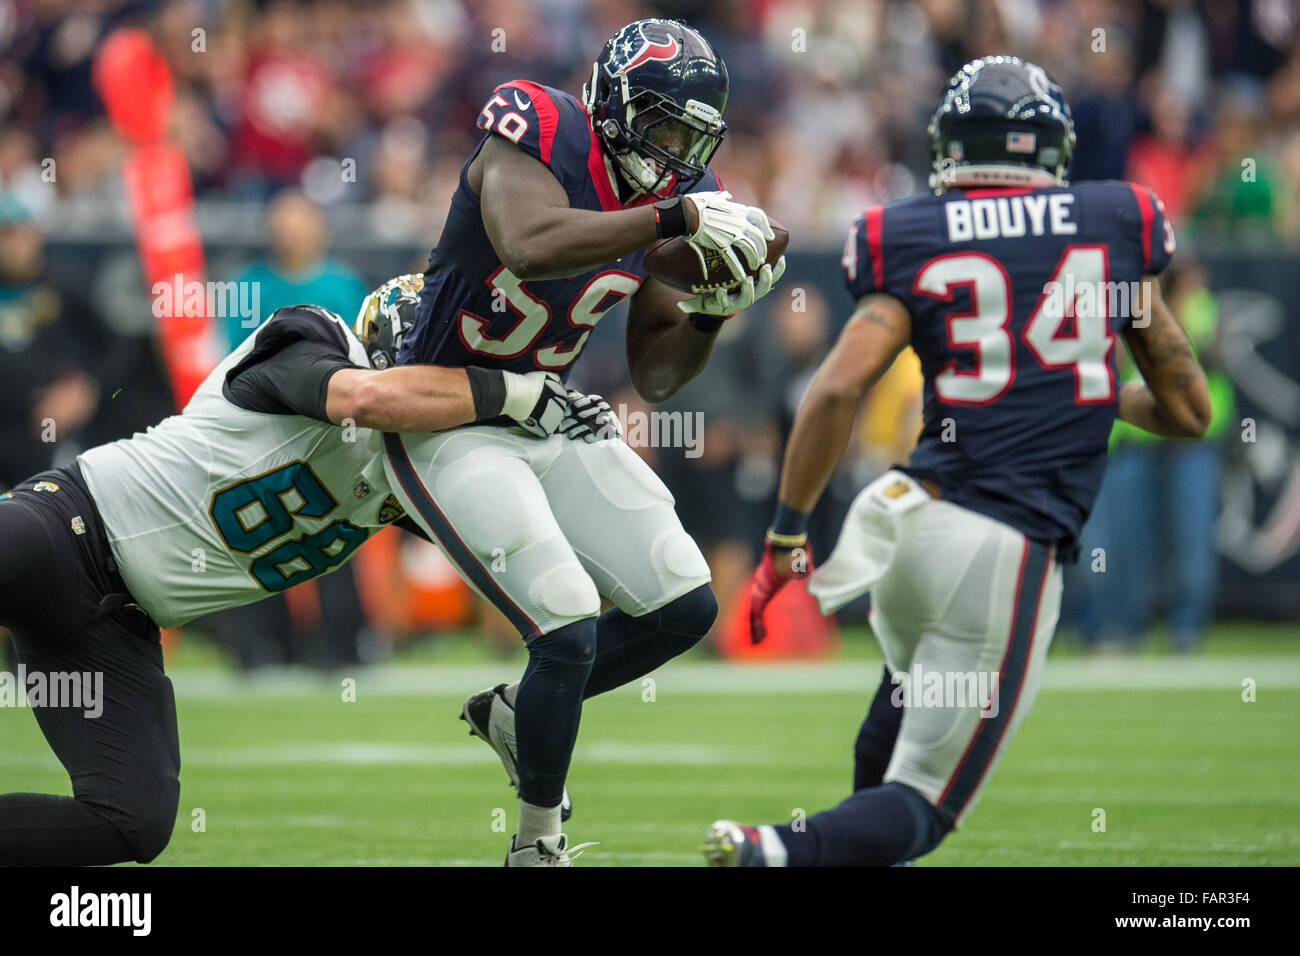 Houston, Texas, USA. 3rd Jan, 2016. Houston Texans outside linebacker Whitney Mercilus (59) recovers a fumble during the 4th quarter of an NFL game between the Houston Texans and the Jacksonville Jaguars at NRG Stadium in Houston, TX on January 3rd, 2016. Credit:  Trask Smith/ZUMA Wire/Alamy Live News Stock Photo